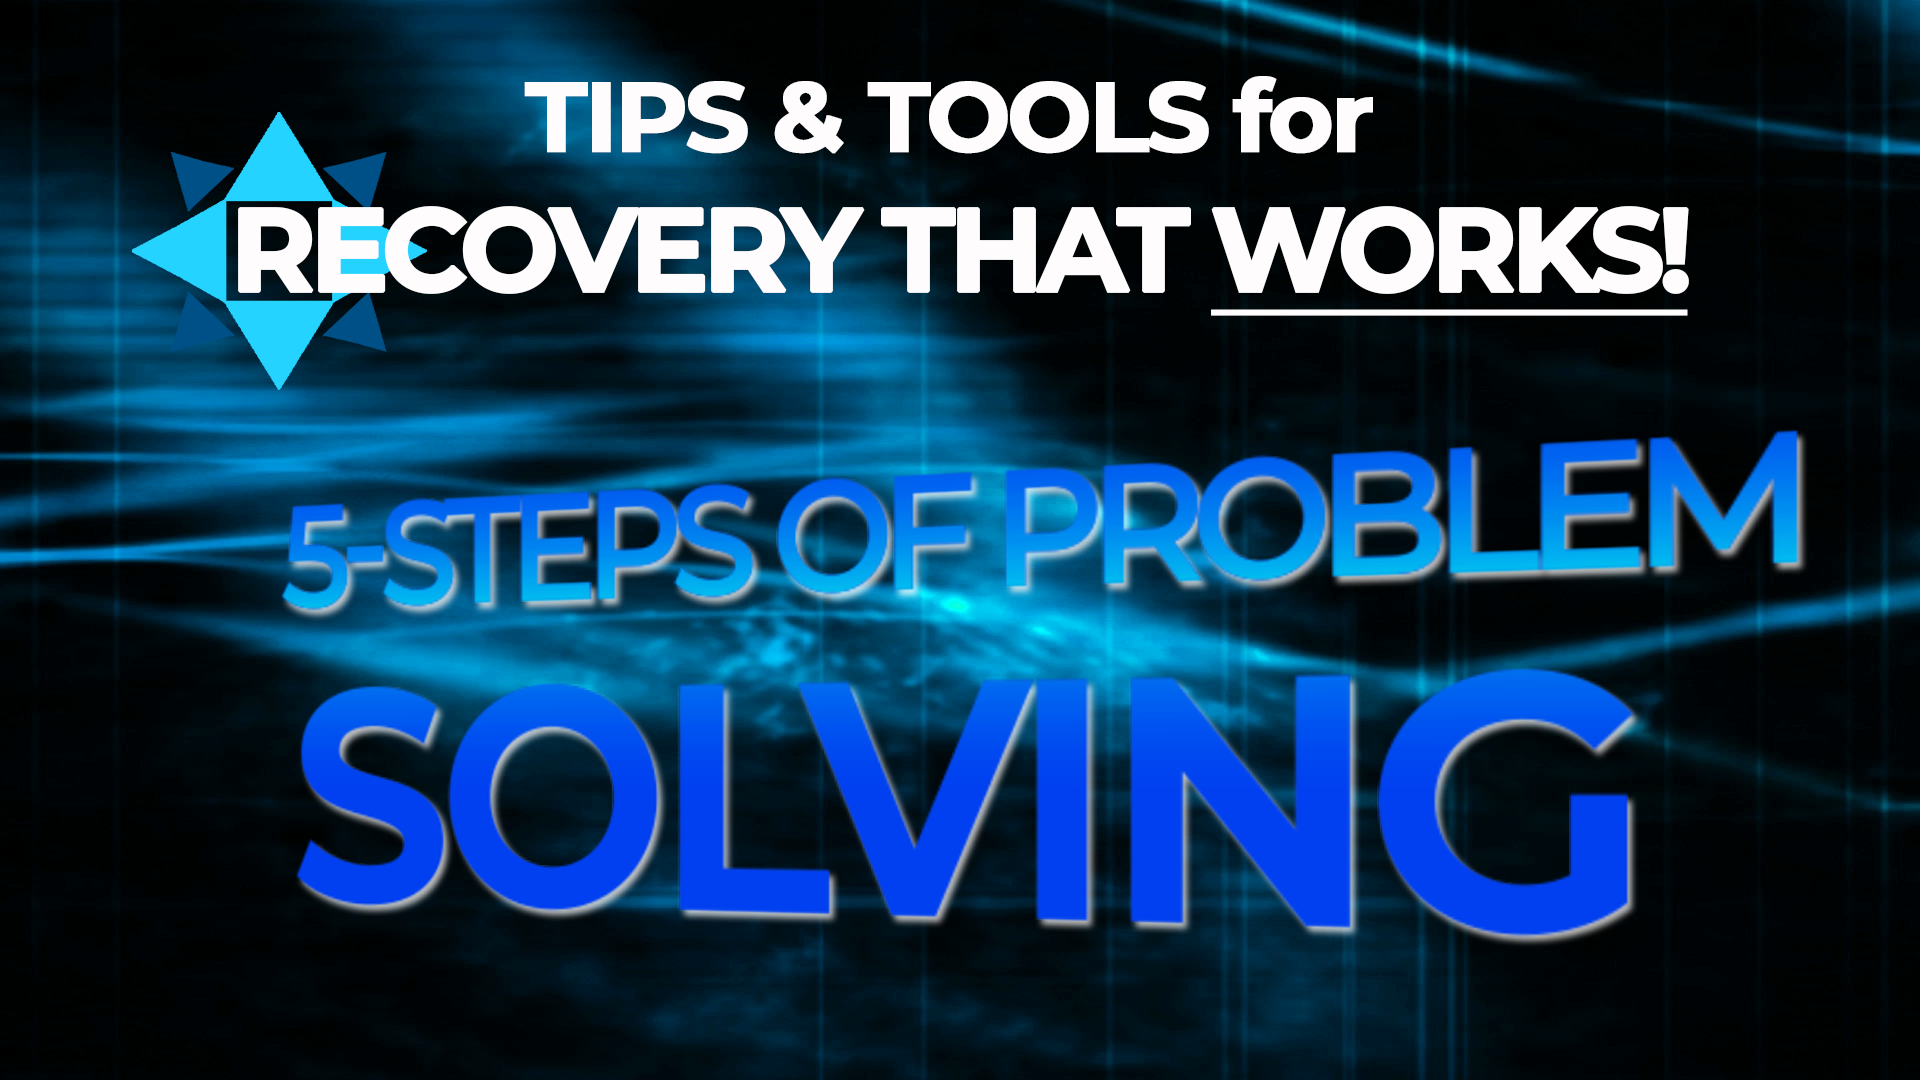 [Video] 5 Steps of Problem Solving – Tips & Tools for Recovery That Works!